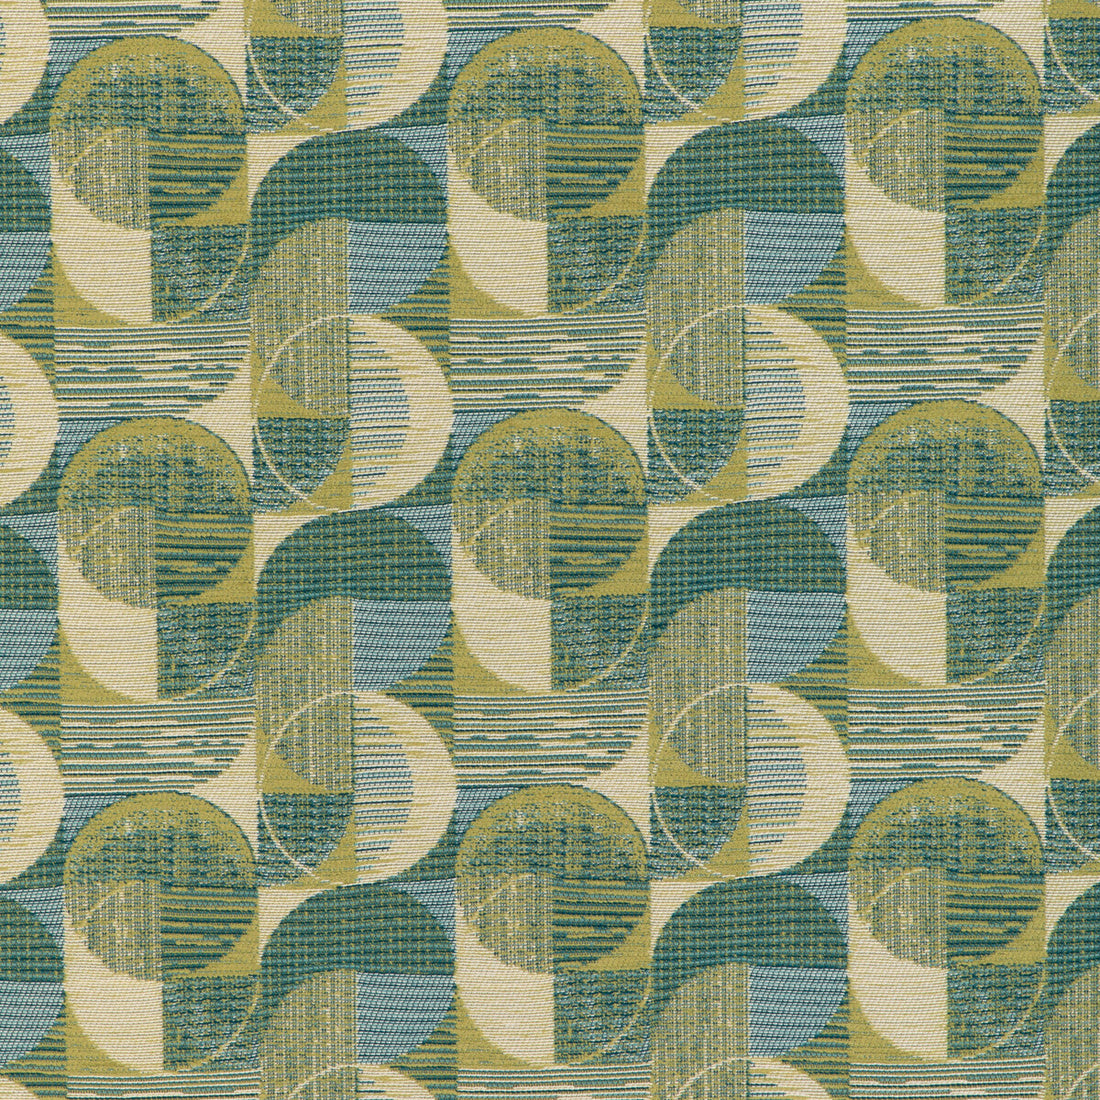 Daybreak fabric in lagoon color - pattern 37050.353.0 - by Kravet Contract in the Chesapeake collection